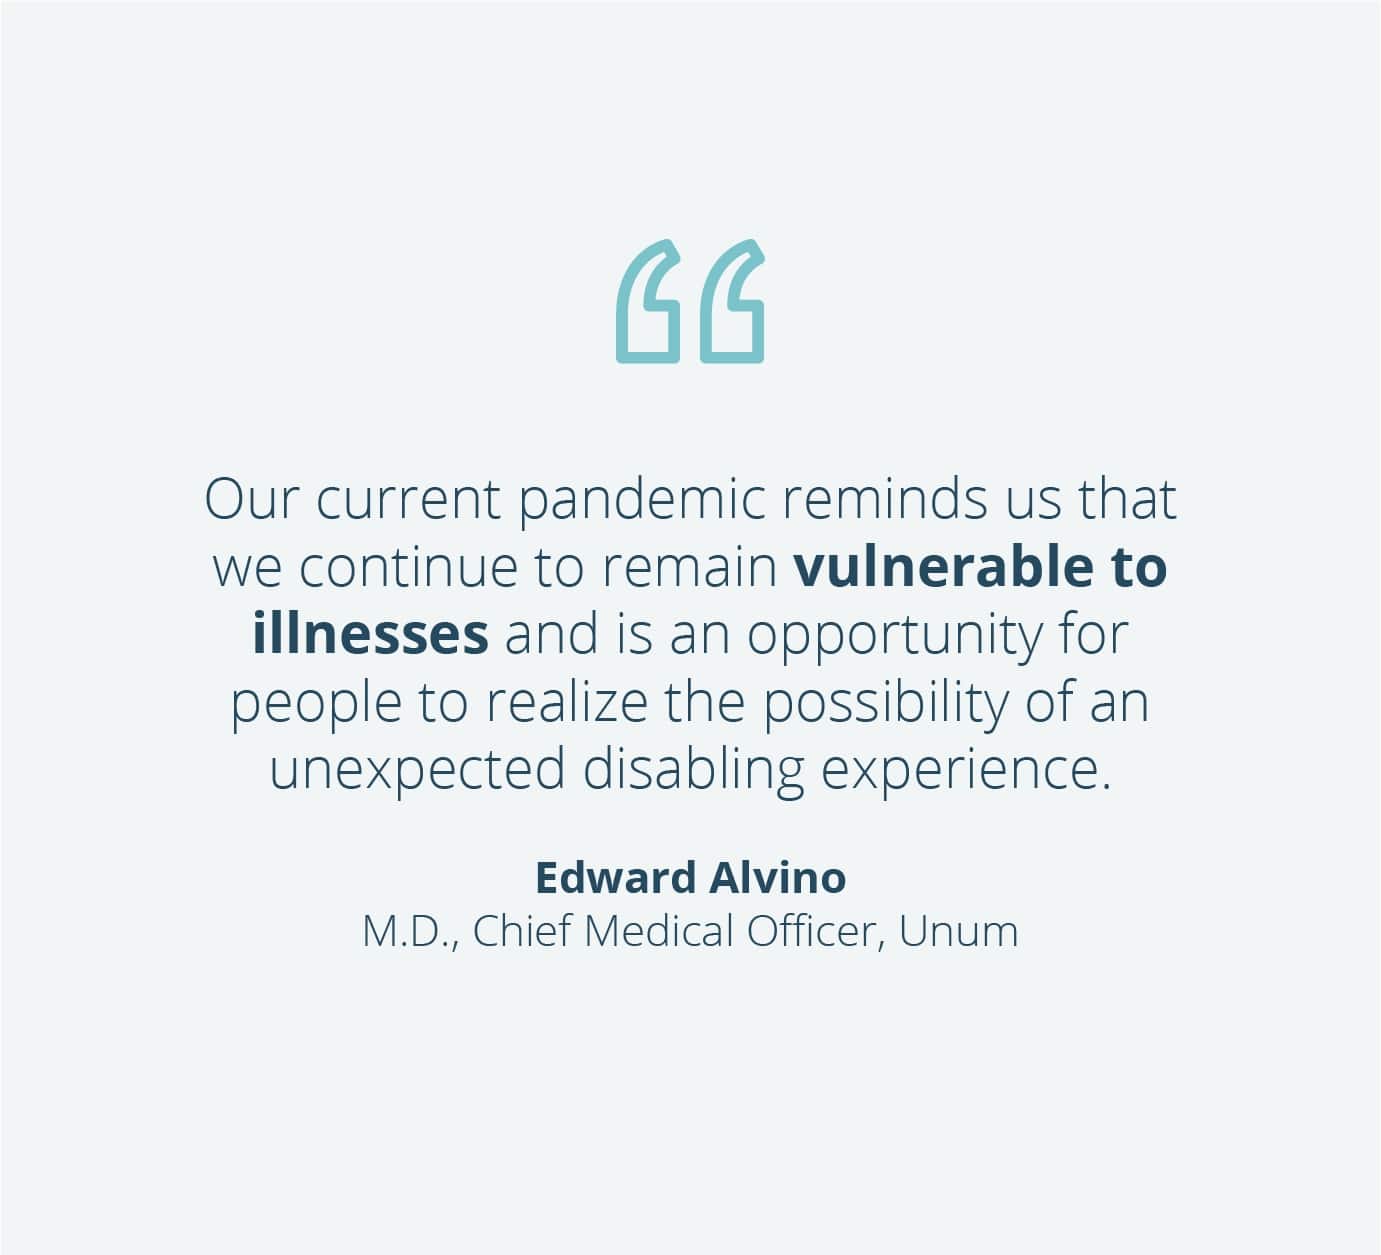 Unum claims data showed that at the height of the pandemic (April 2020) in April, more than a third of Unum’s short-term disability claims were for COVID-19.